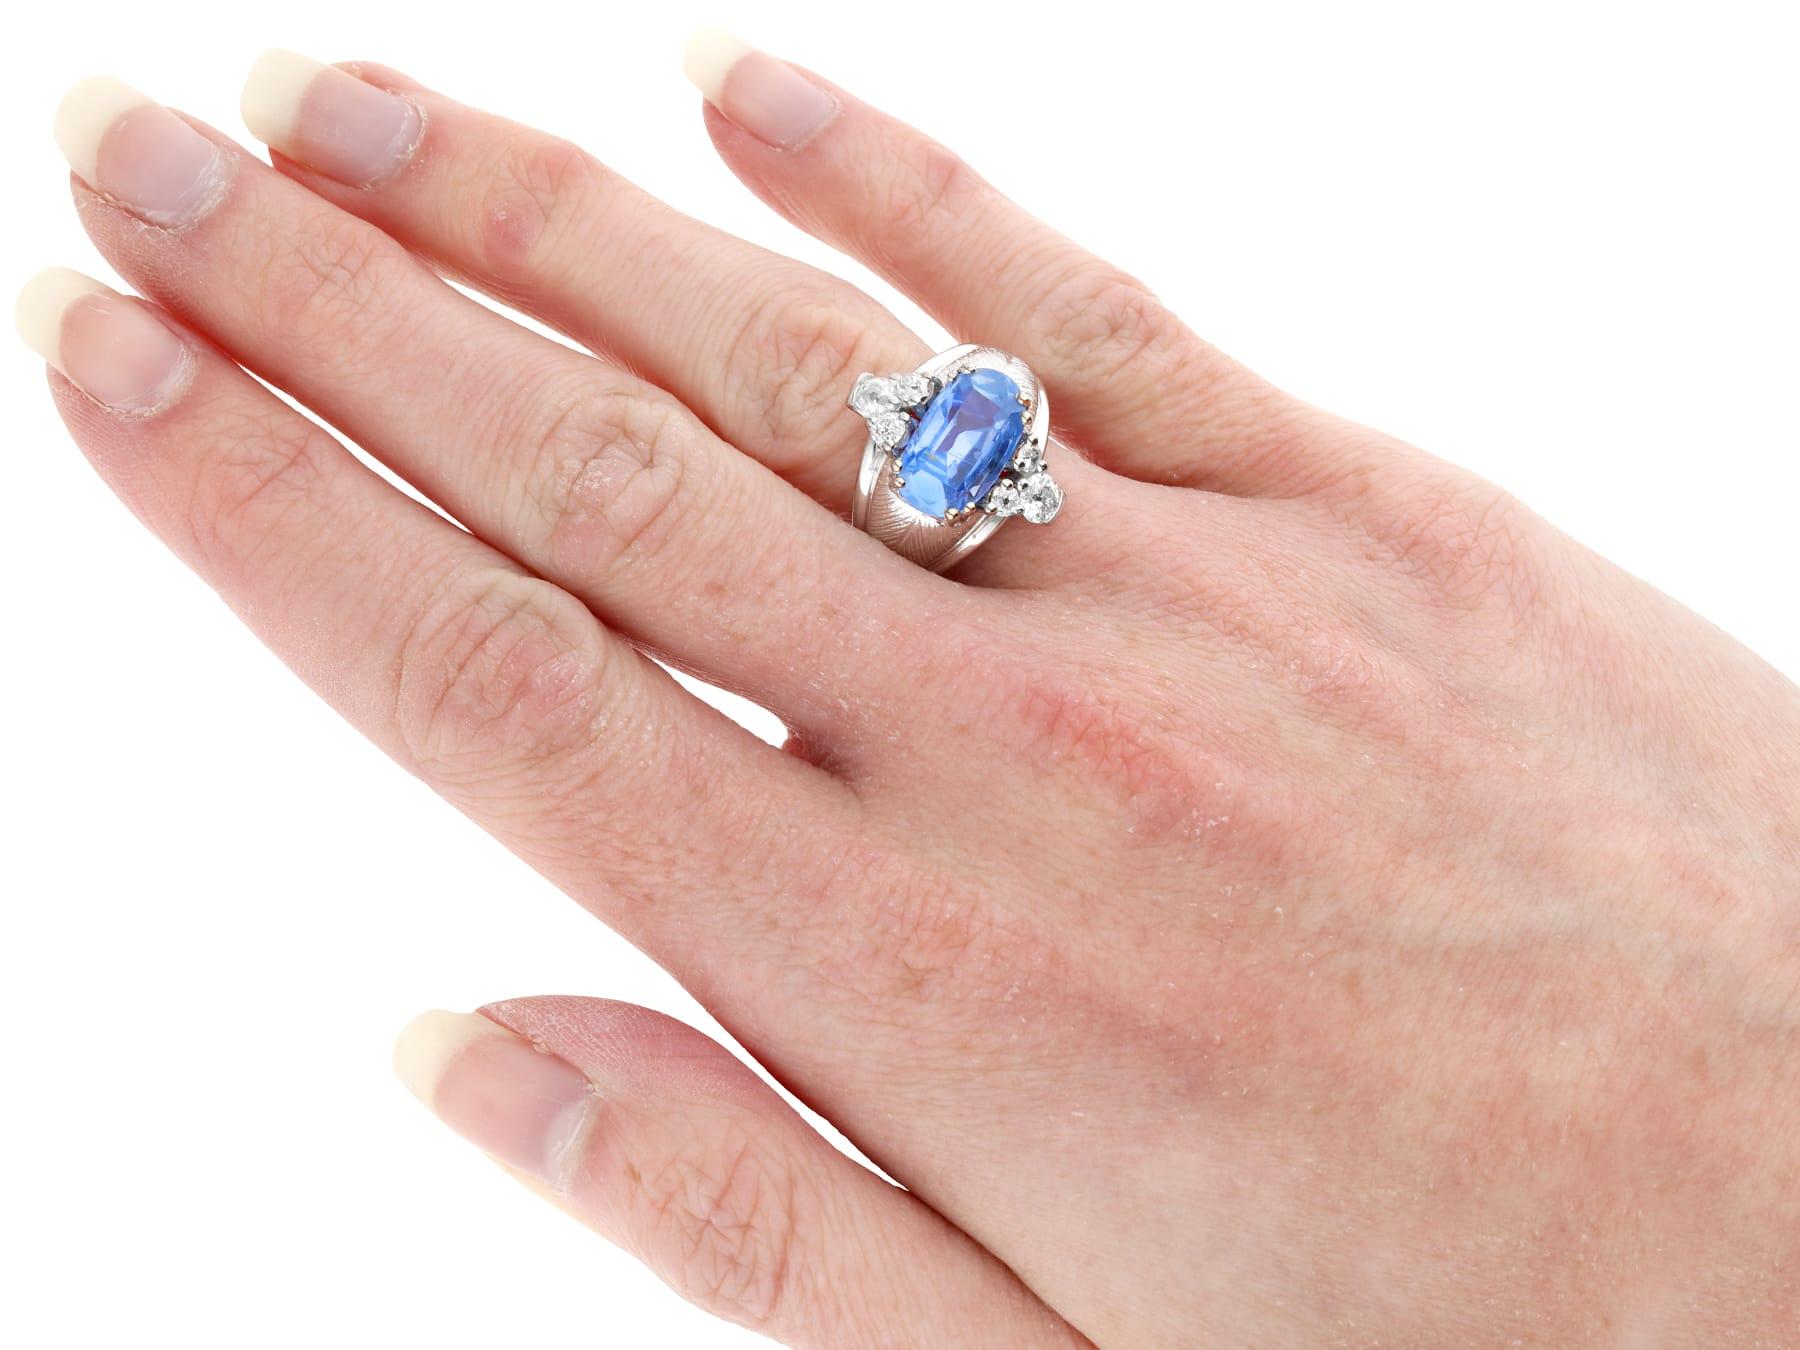 Vintage 4.60 Carat Ceylon Sapphire and 0.82 Carat Diamond White Gold Dress Ring In Excellent Condition For Sale In Jesmond, Newcastle Upon Tyne